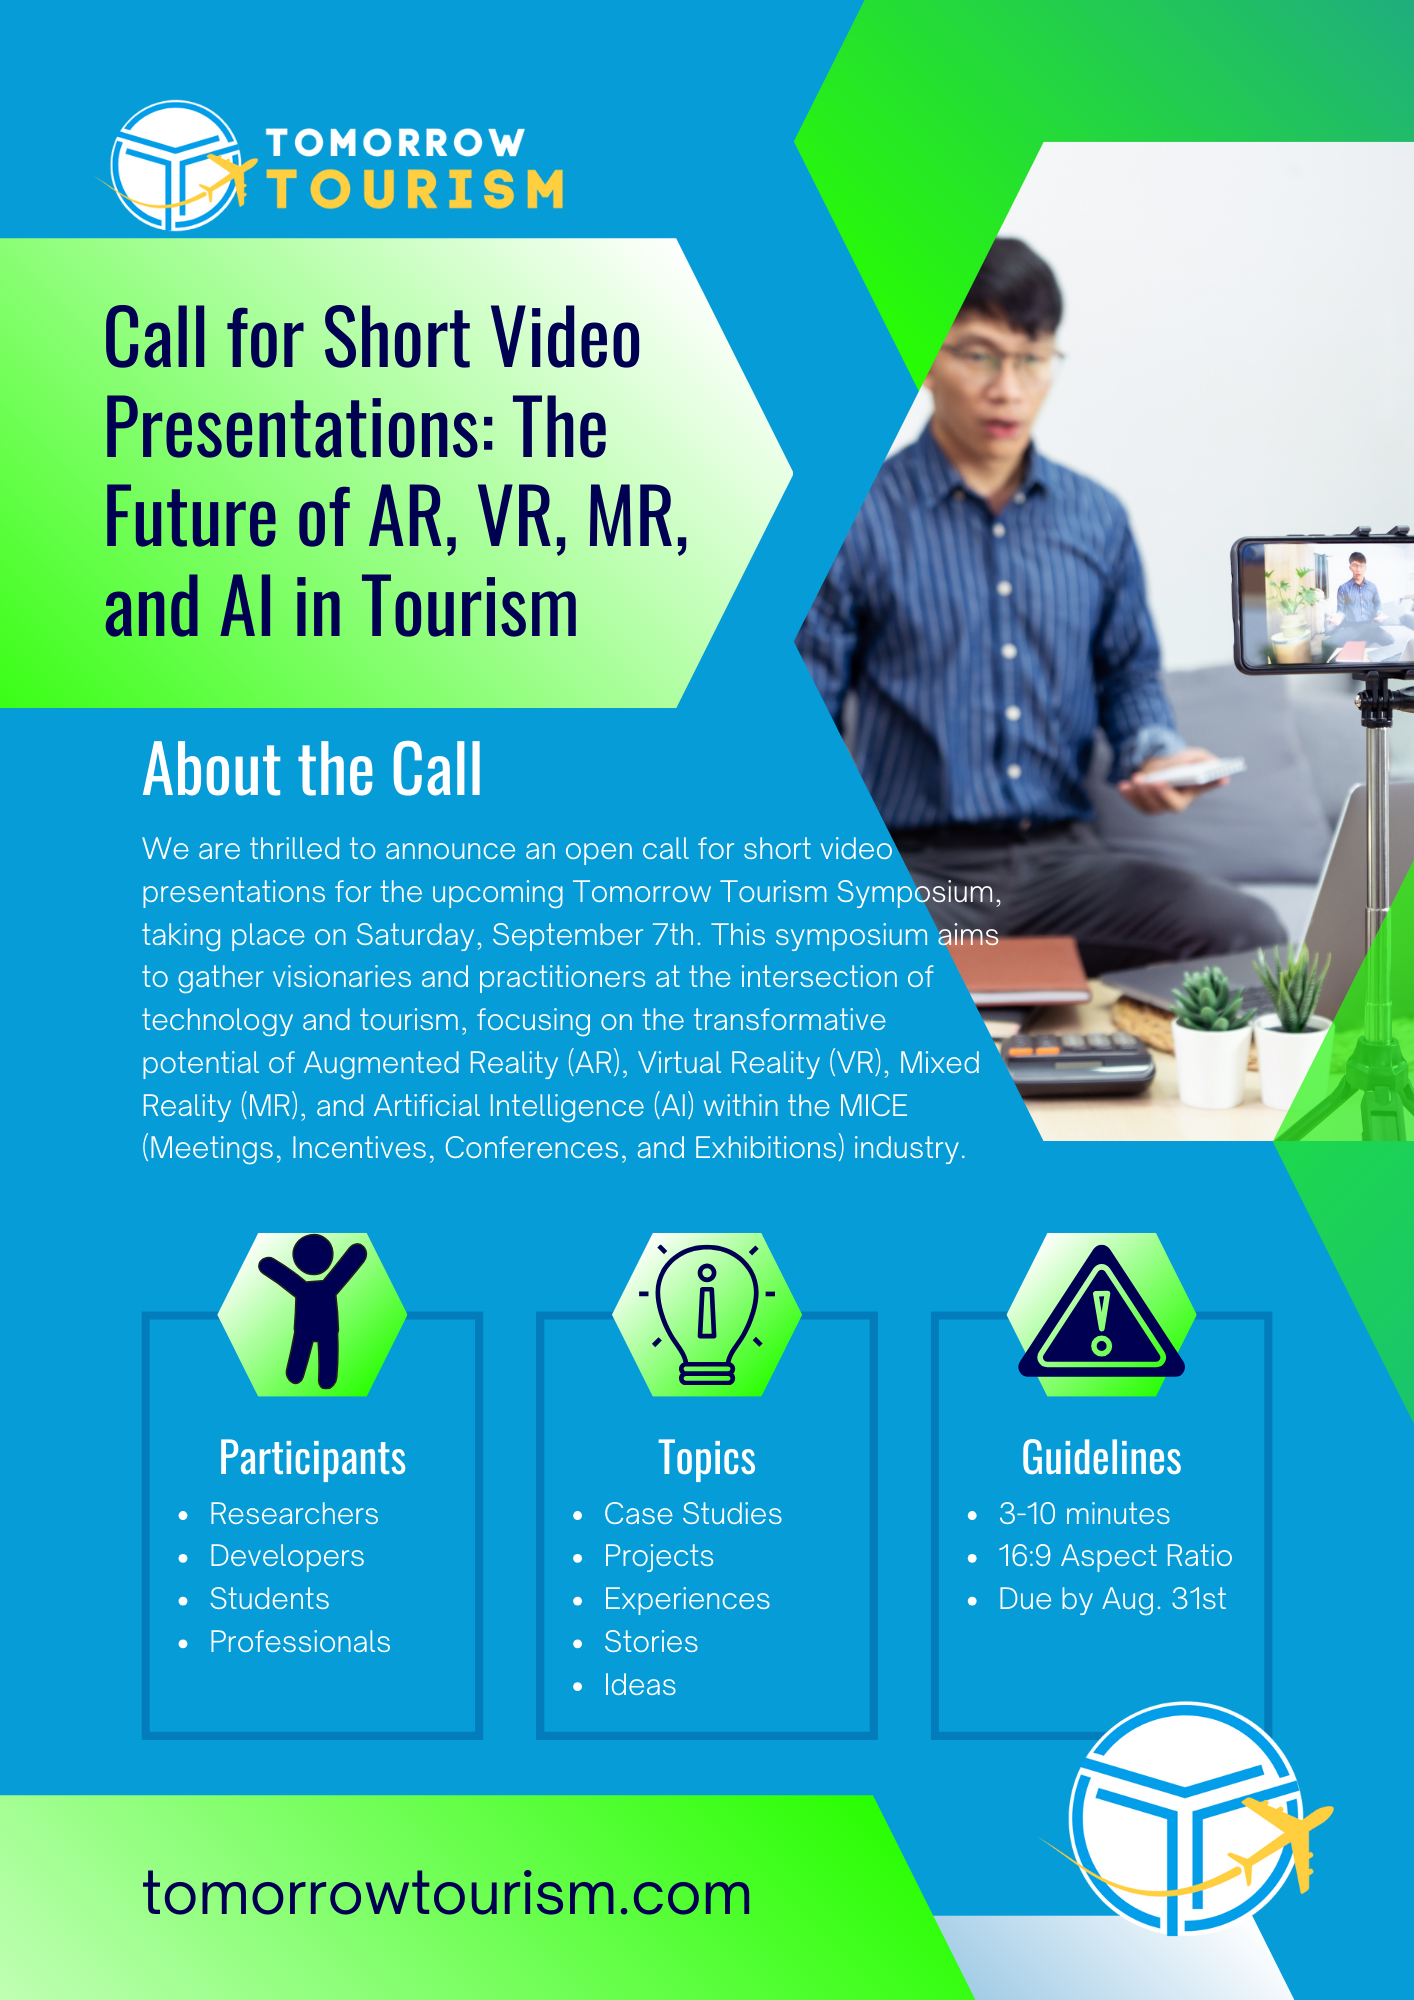 Call for Video